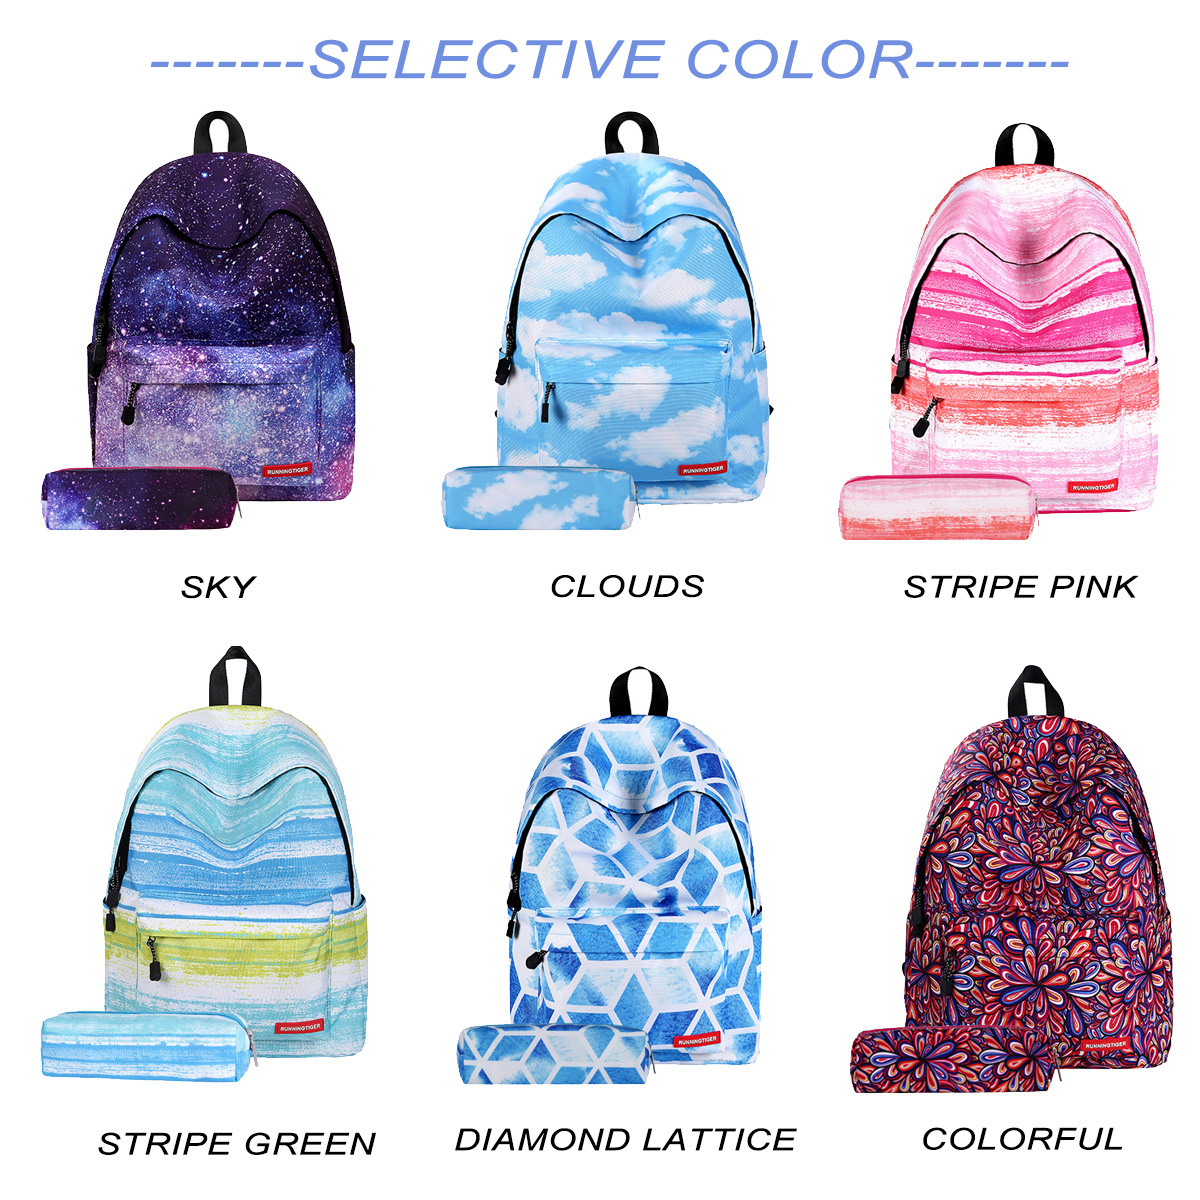 2PcsSet-Fashion-Starry-Sky-Striped-Canvas-School-Backpack-SchoolbagMatching-Pencil-Bag-Gift-for-Girl-1572762-1